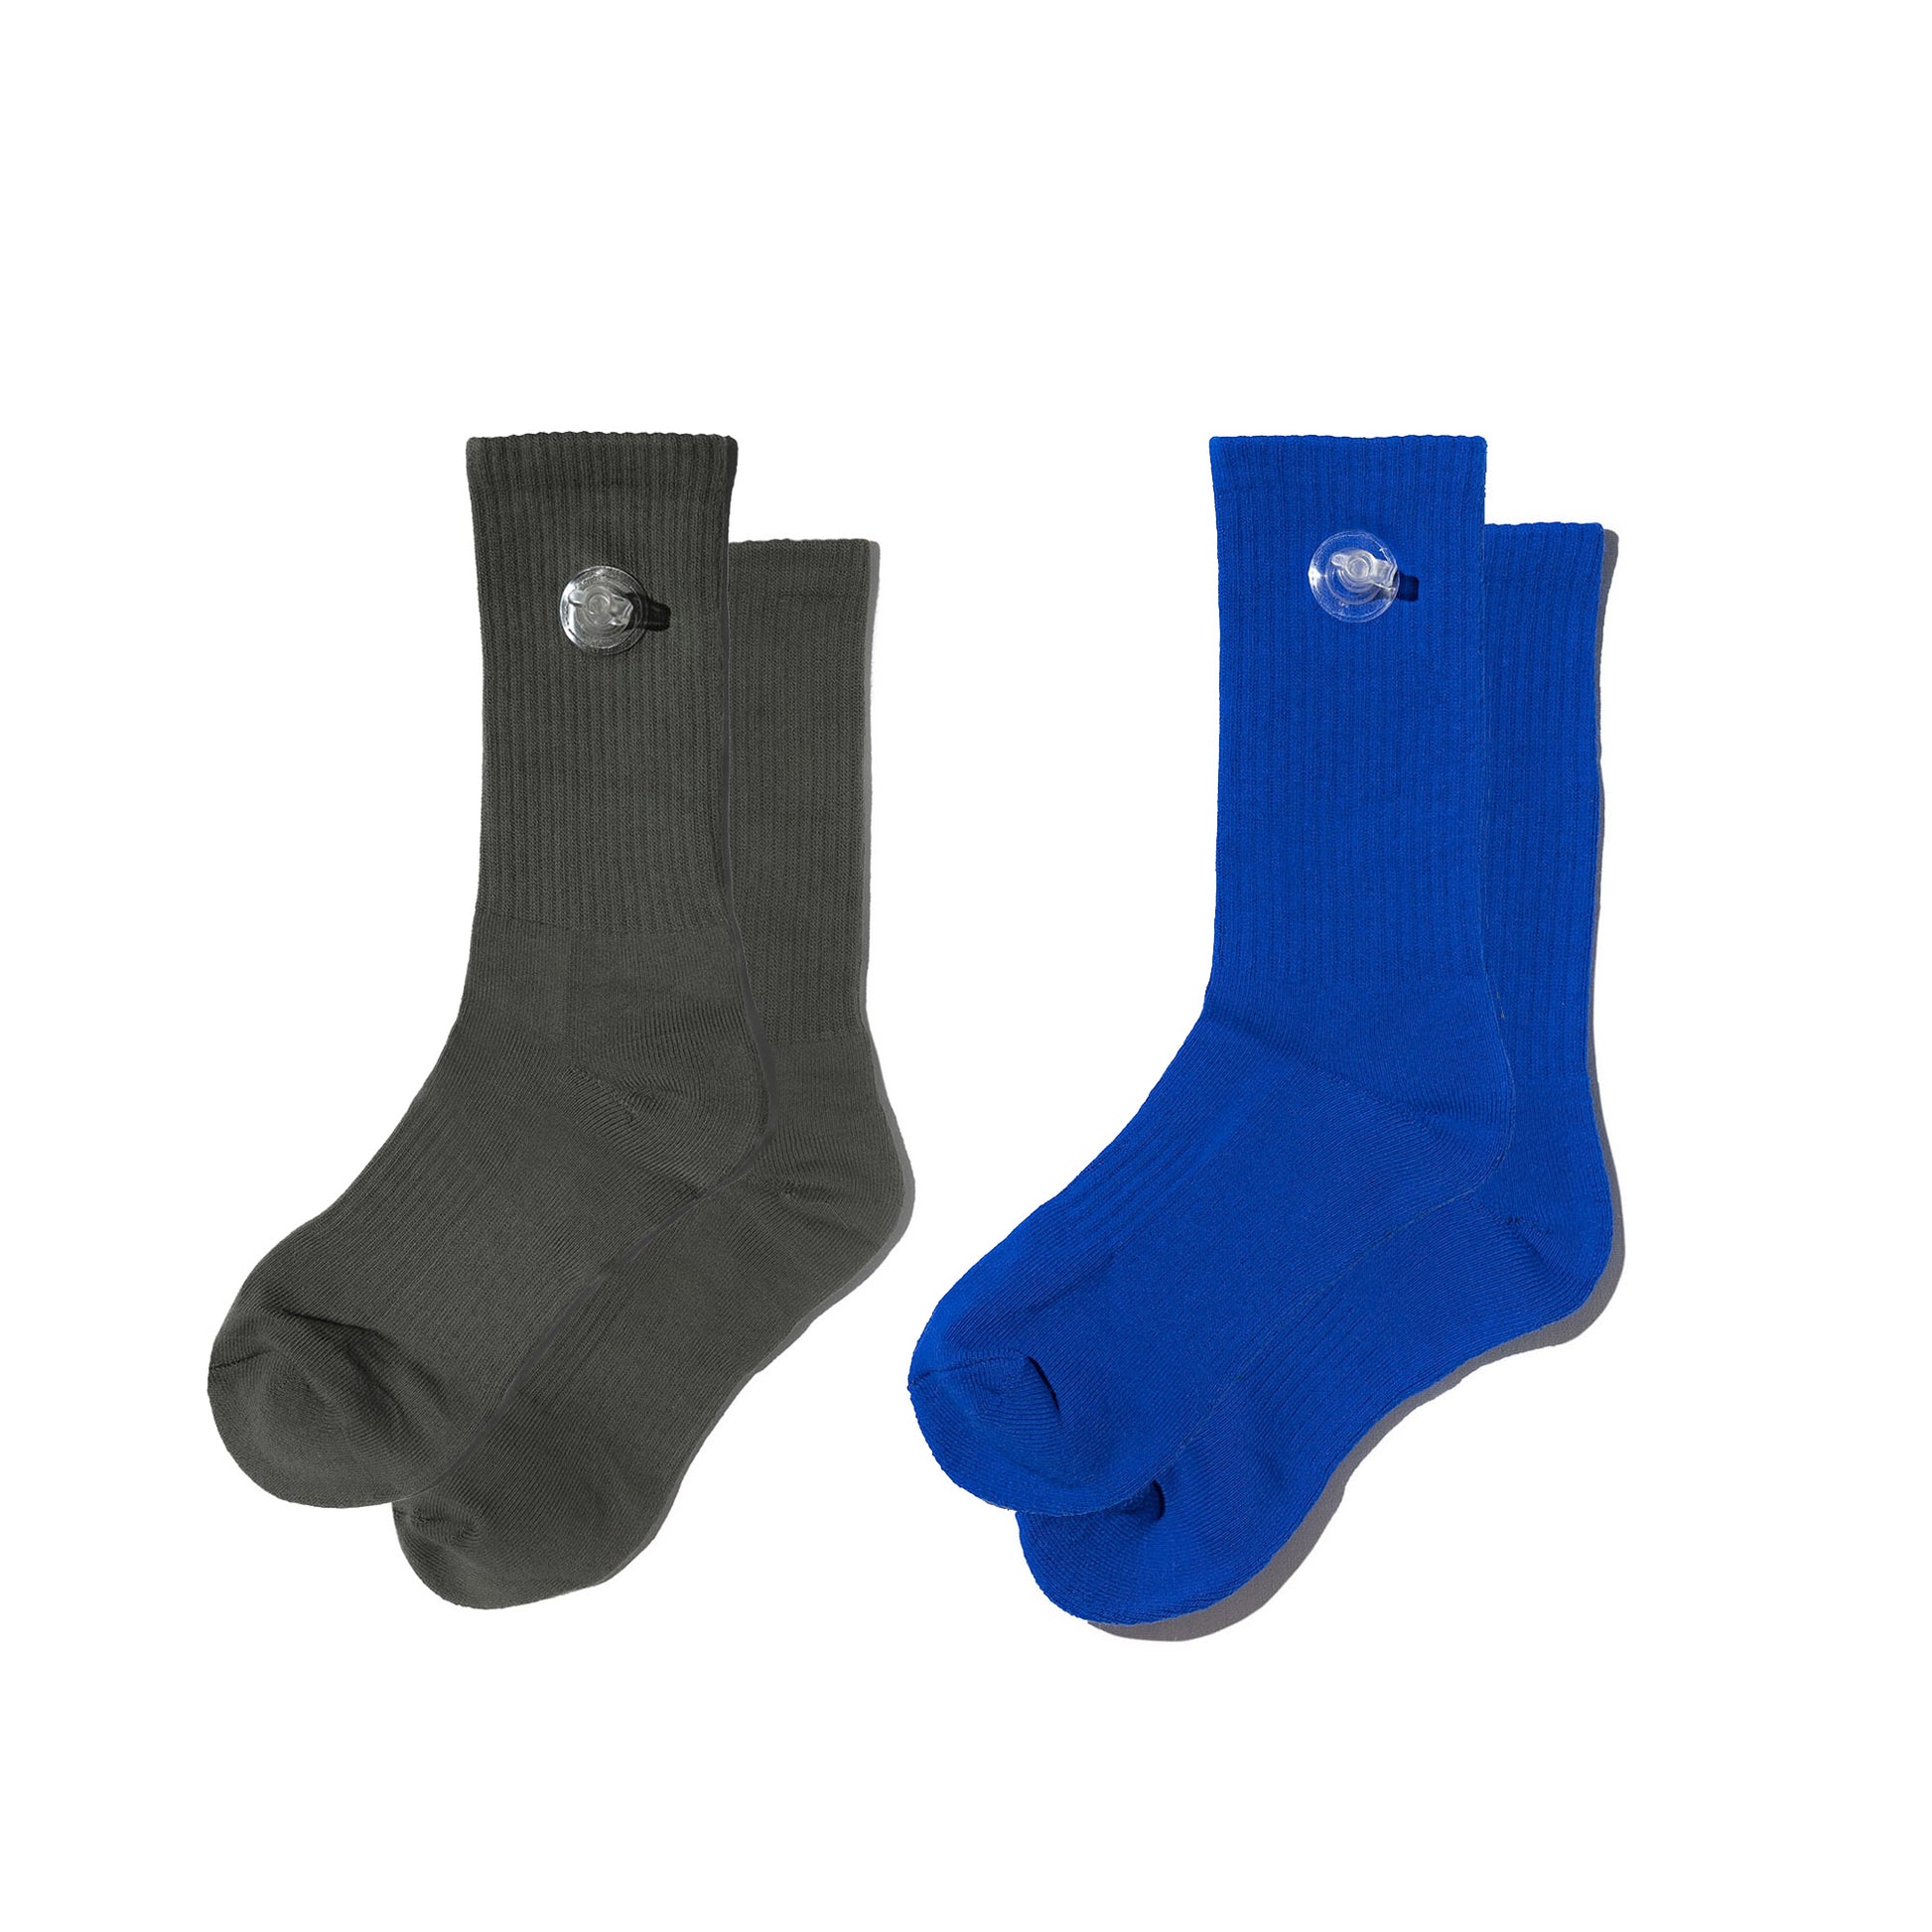 Toson, Inflatable Socks 2 Pack in Army Green + Royal Blue